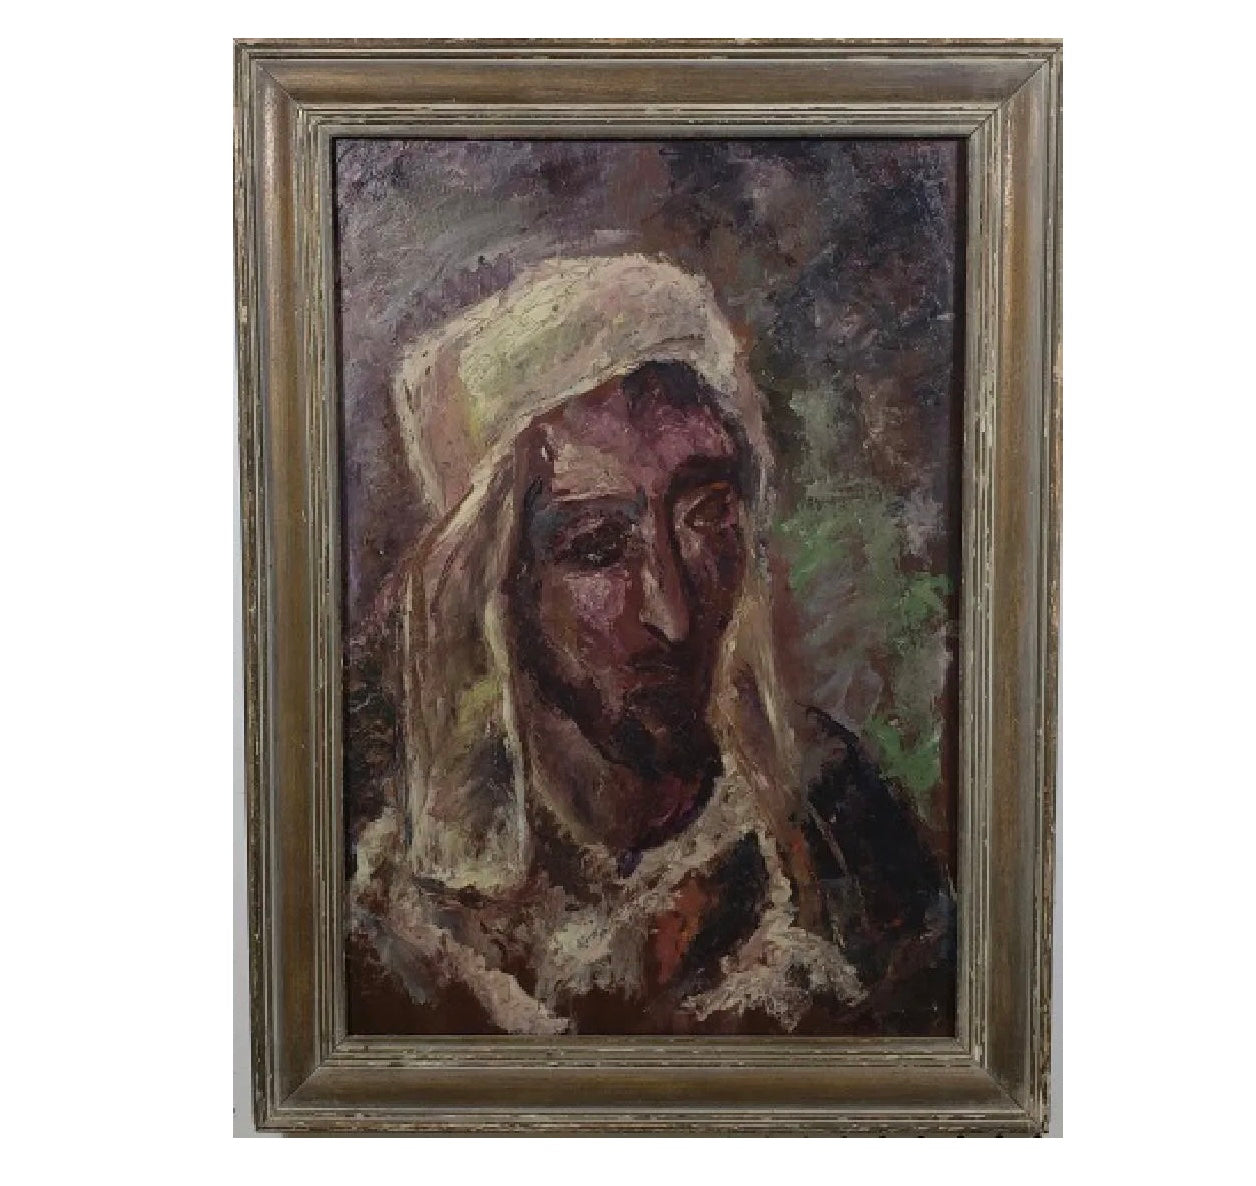 European School - Expressionist Portrait of a North African Man - Mid 20th C - - Oil on Board Painting | Work of Man